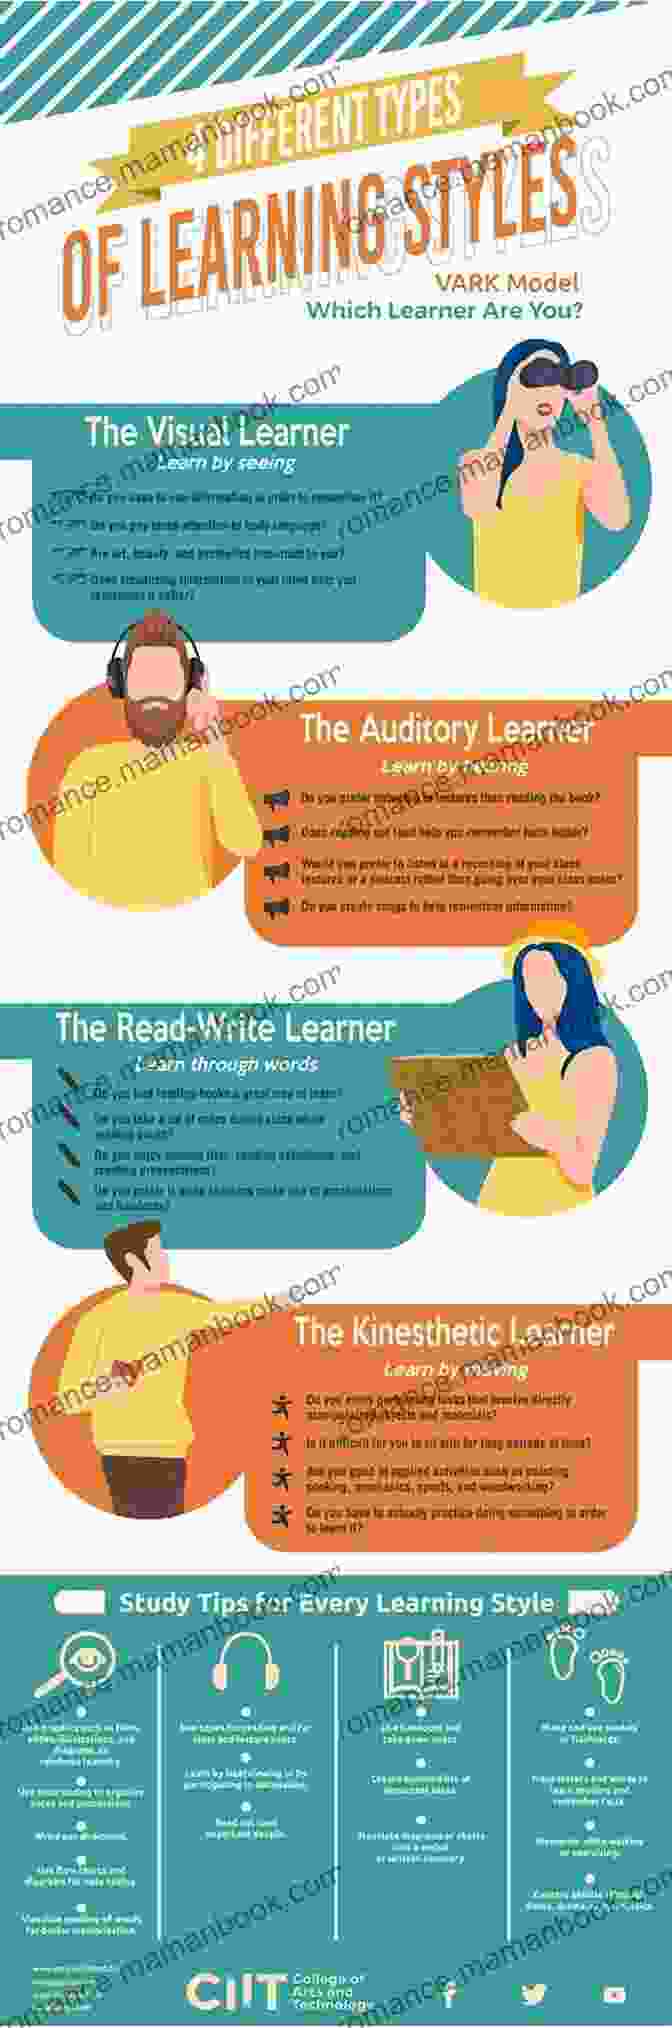 Infographic Displaying Different Learning Styles Teaching Harry Potter To Creative Writers: An Educator S Guide